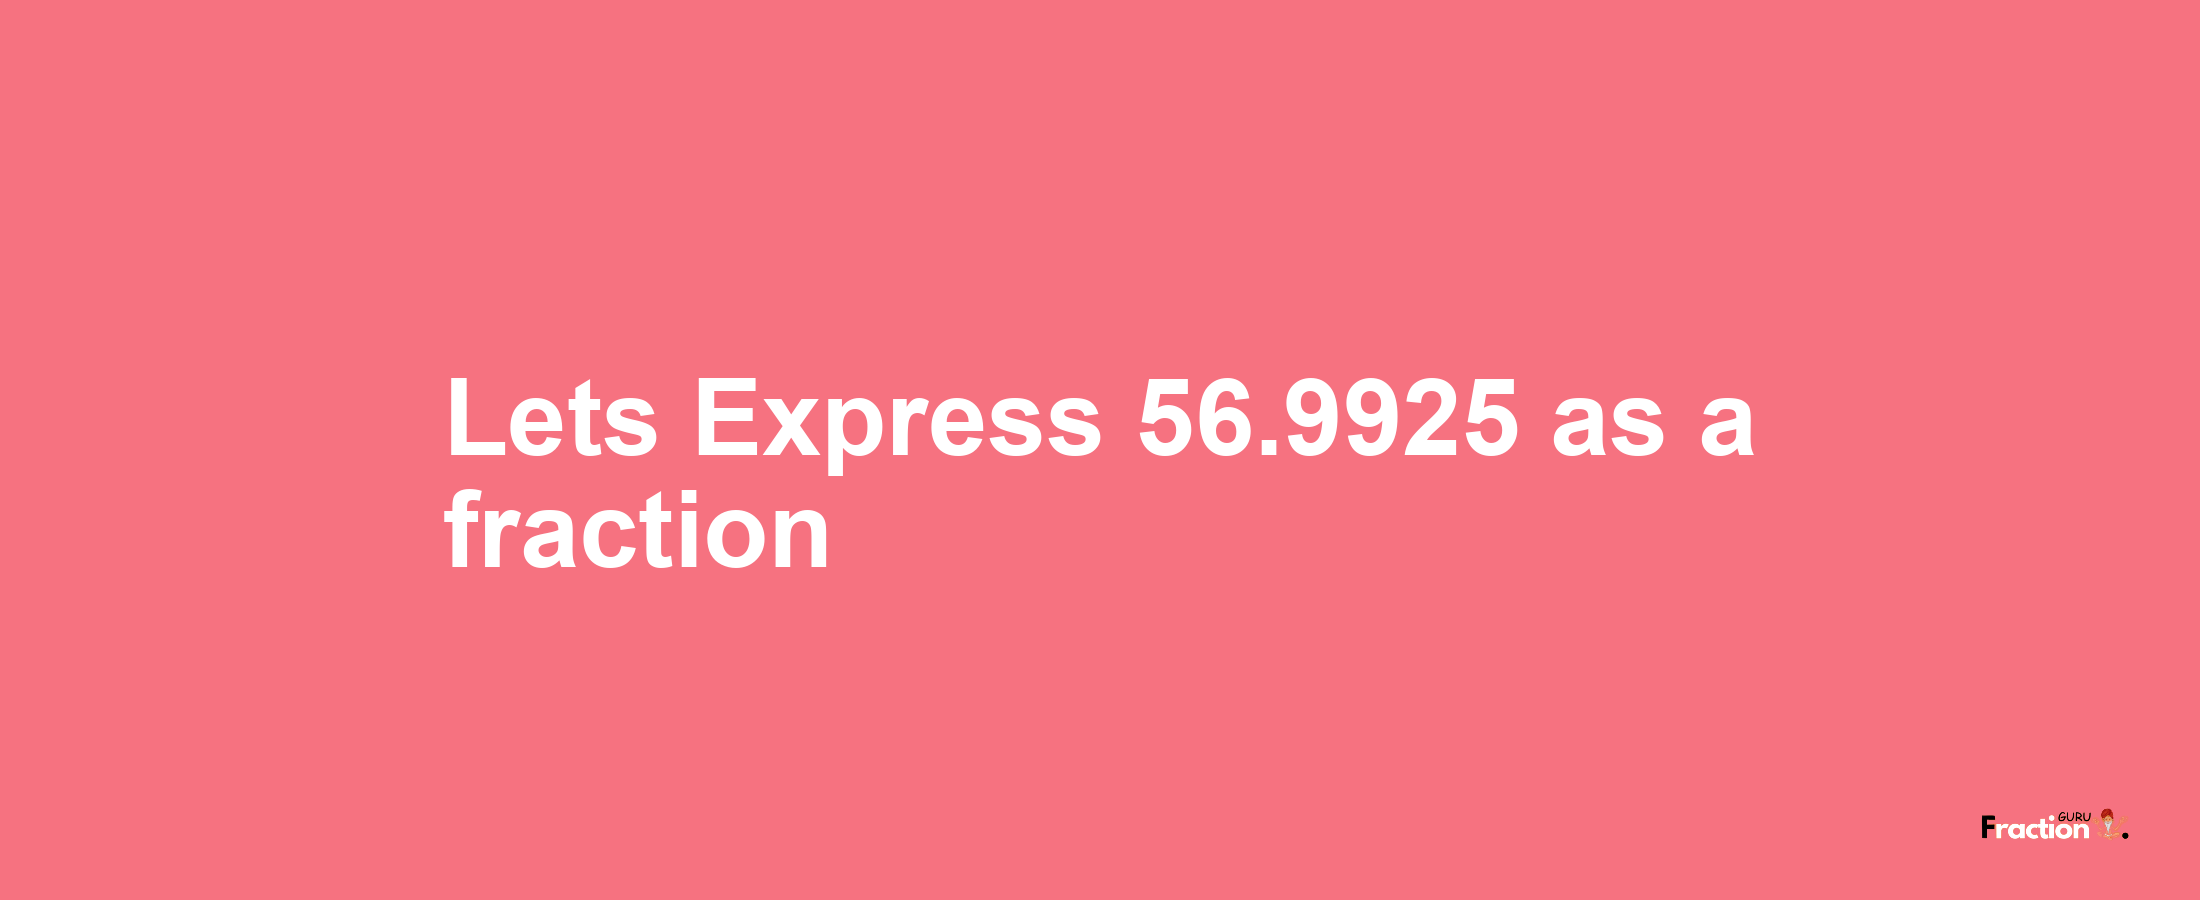 Lets Express 56.9925 as afraction